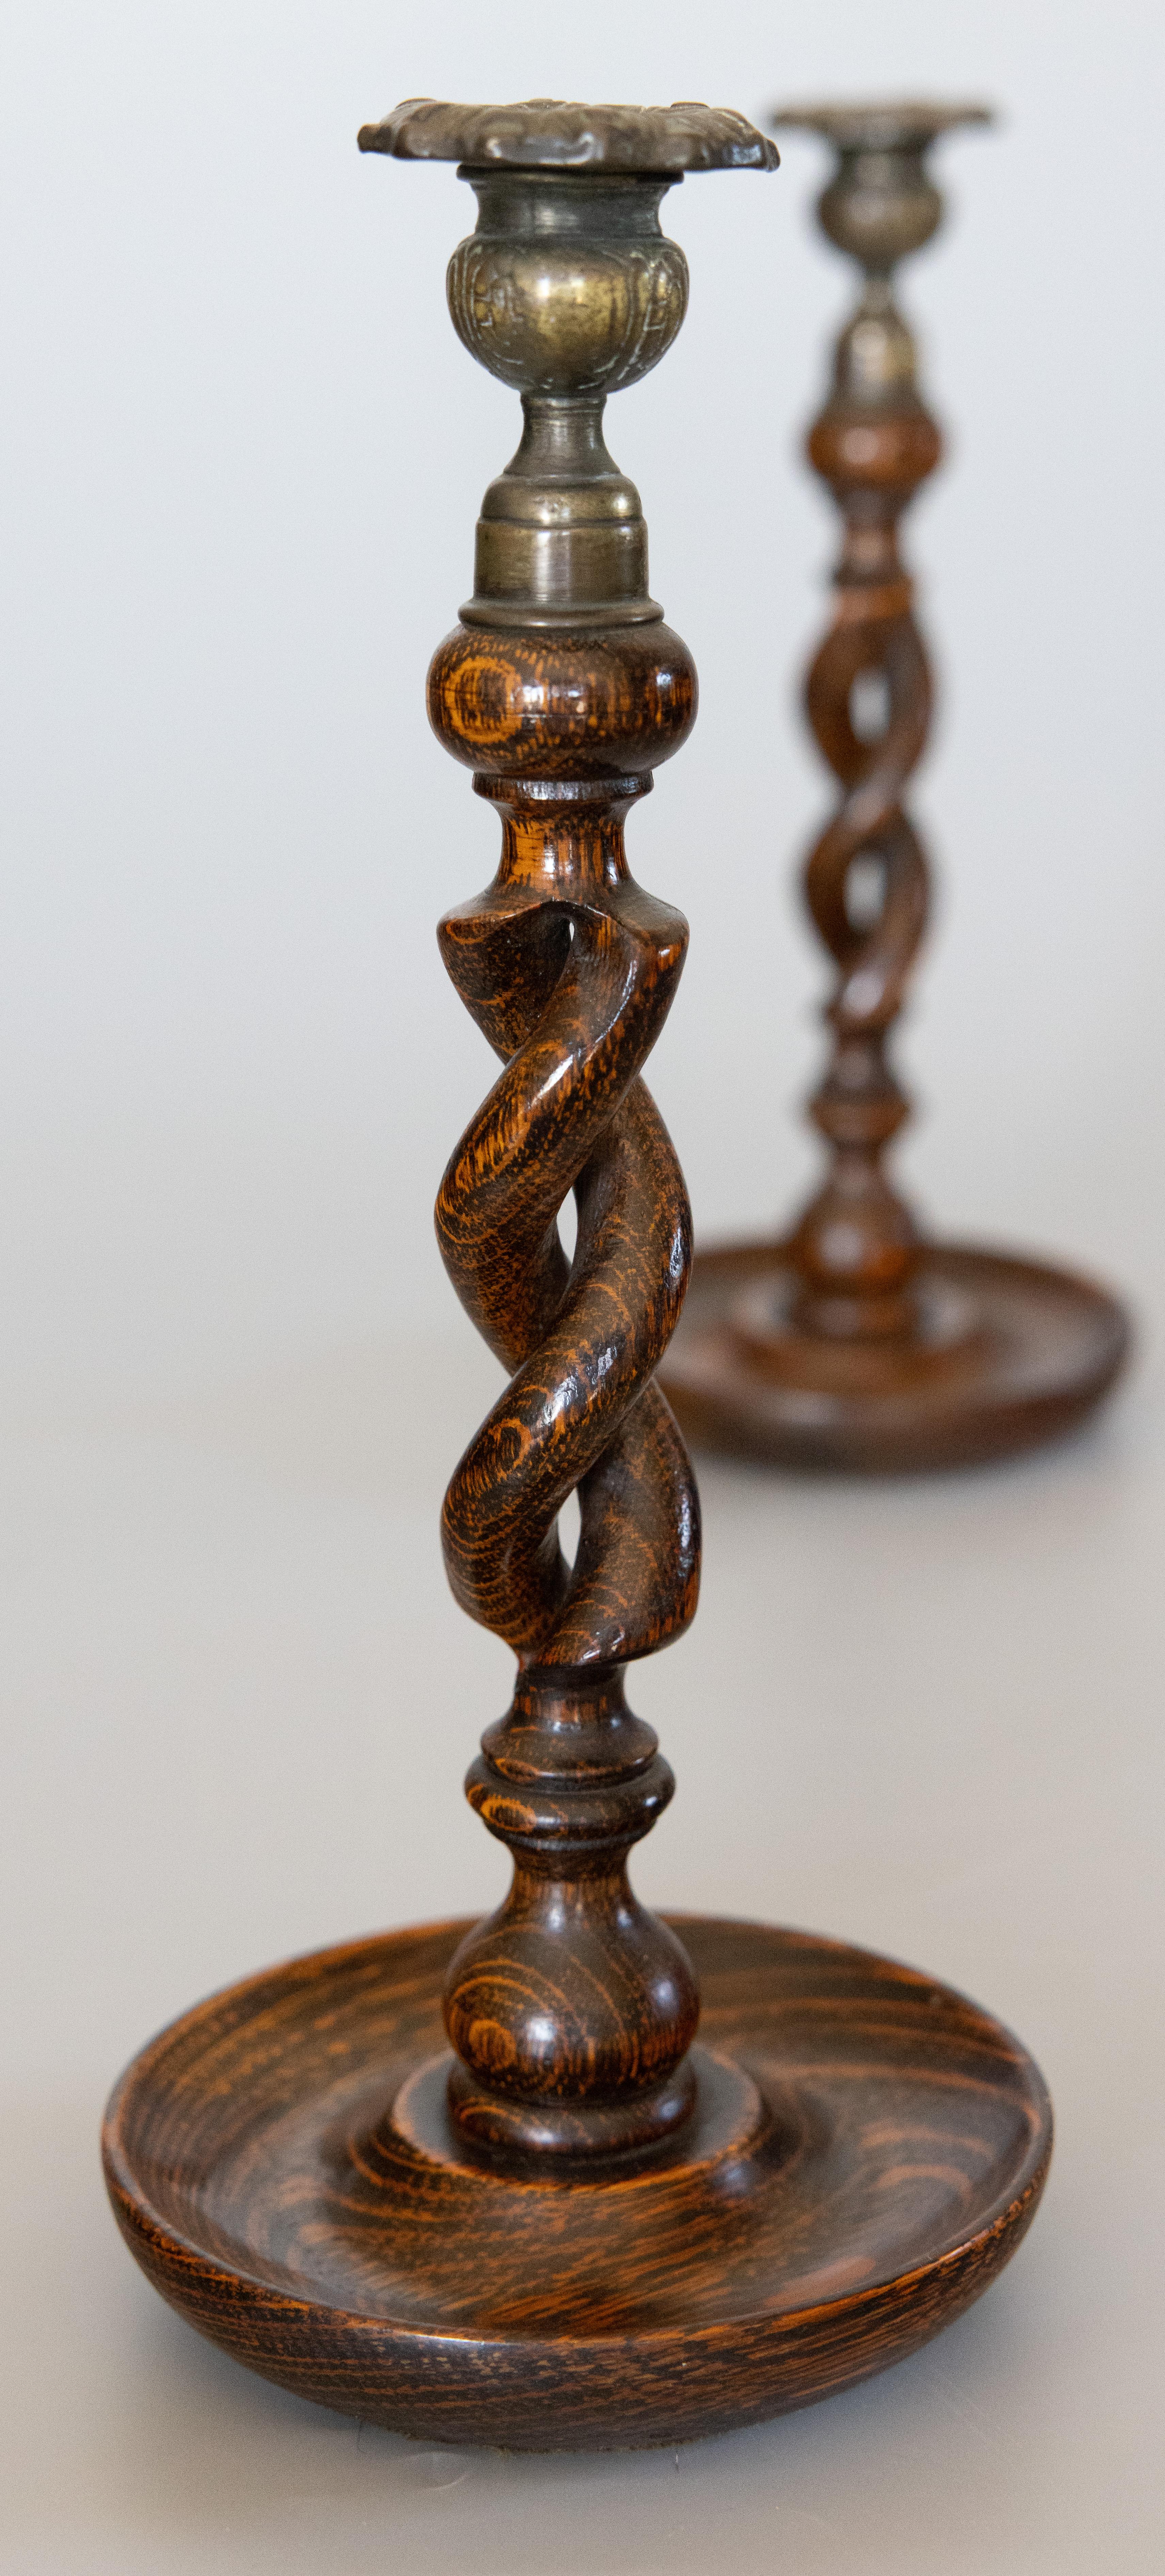 A fine tall pair of English barley twist tiger oak and brass candle holders, circa 1900. This gorgeous pair have hand cast brass thistle top candle cups and hand carved open barley twist stems on hand-turned bases with a richly figured grain and